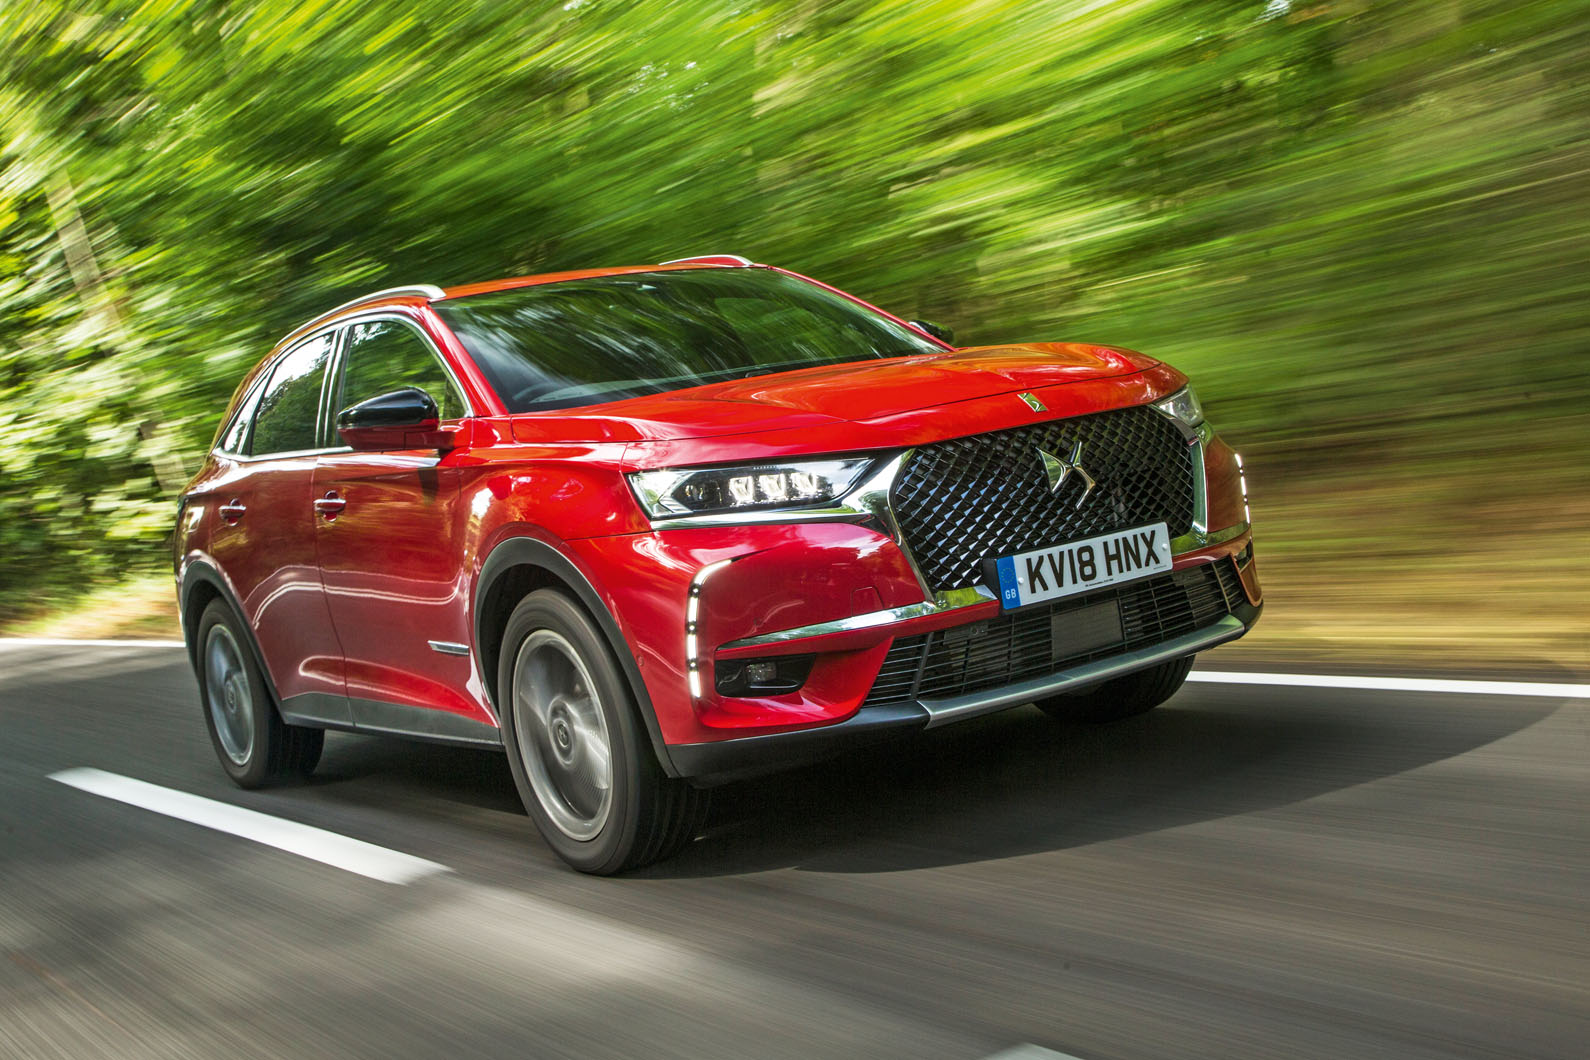 Used DS 7 Crossback 2017-2022 review